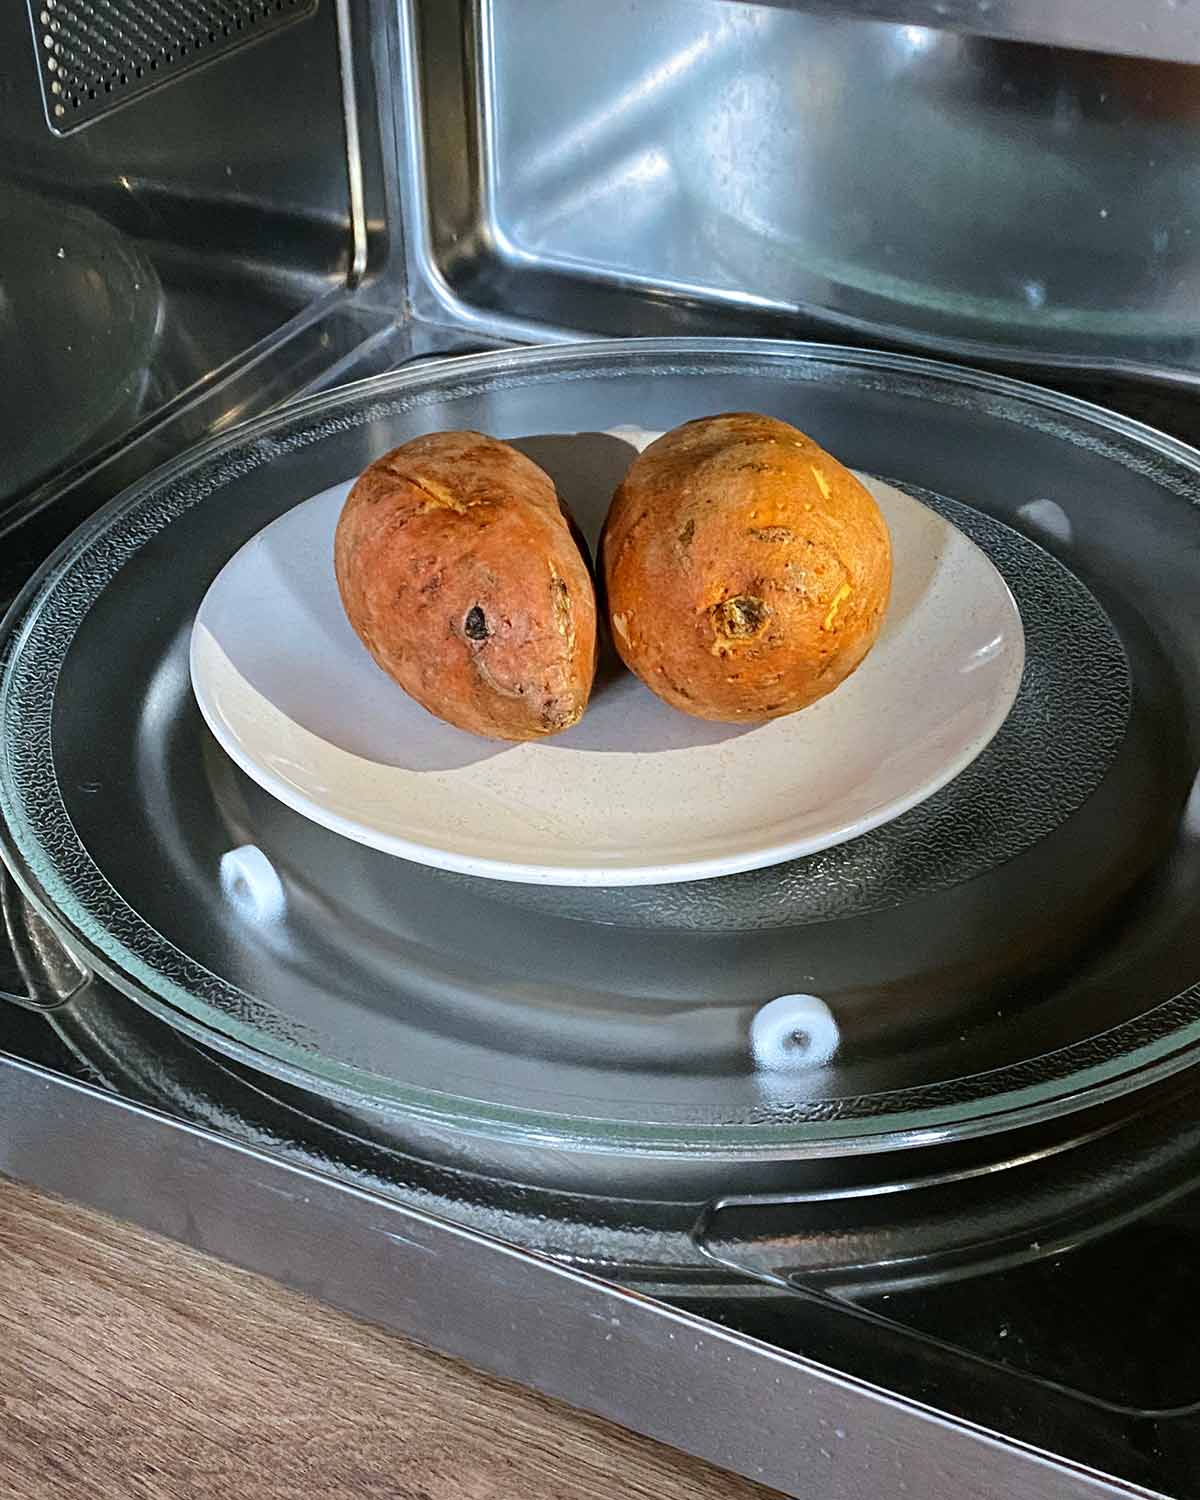 Two sweet potatoes on a plate in a microwave.